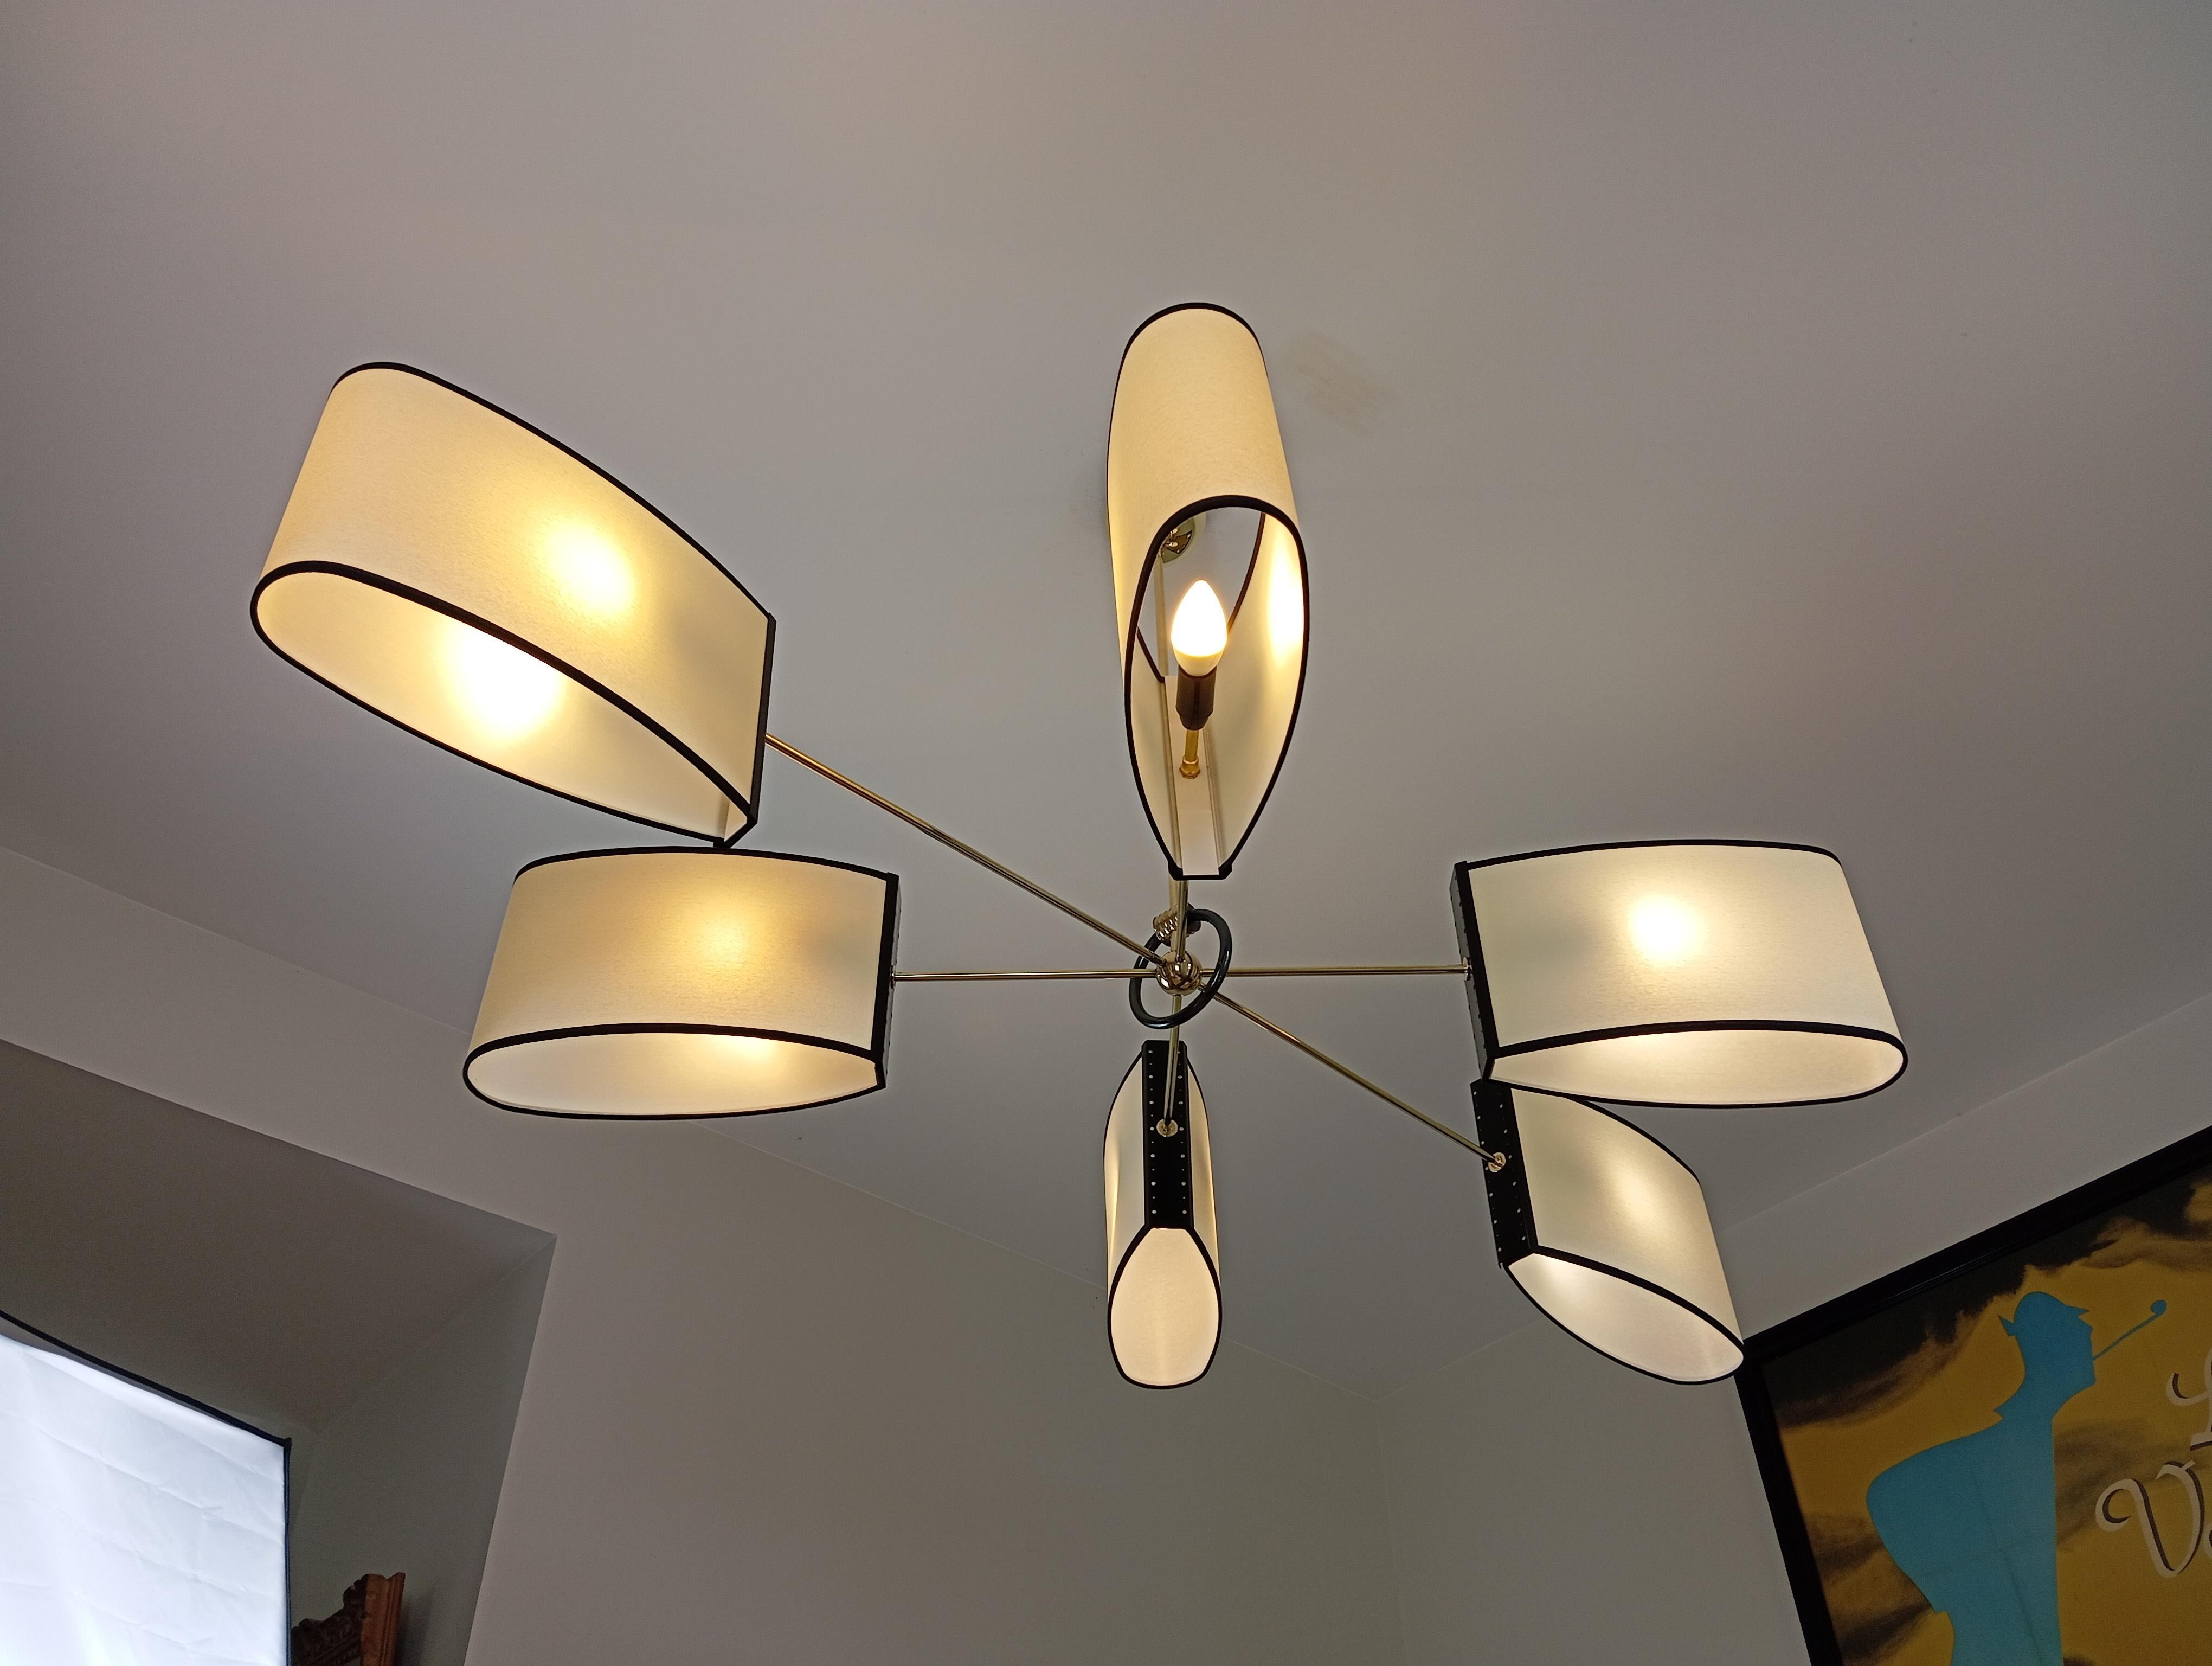 Brass chandelier, composed of 6 asymmetrical light arms terminated by oval shades.
The arms are linked by a central sphere surrounded by a ring.
French work circa 1950 by Maison Lunel.
This chandelier has been entirely restored.
Perfect condition